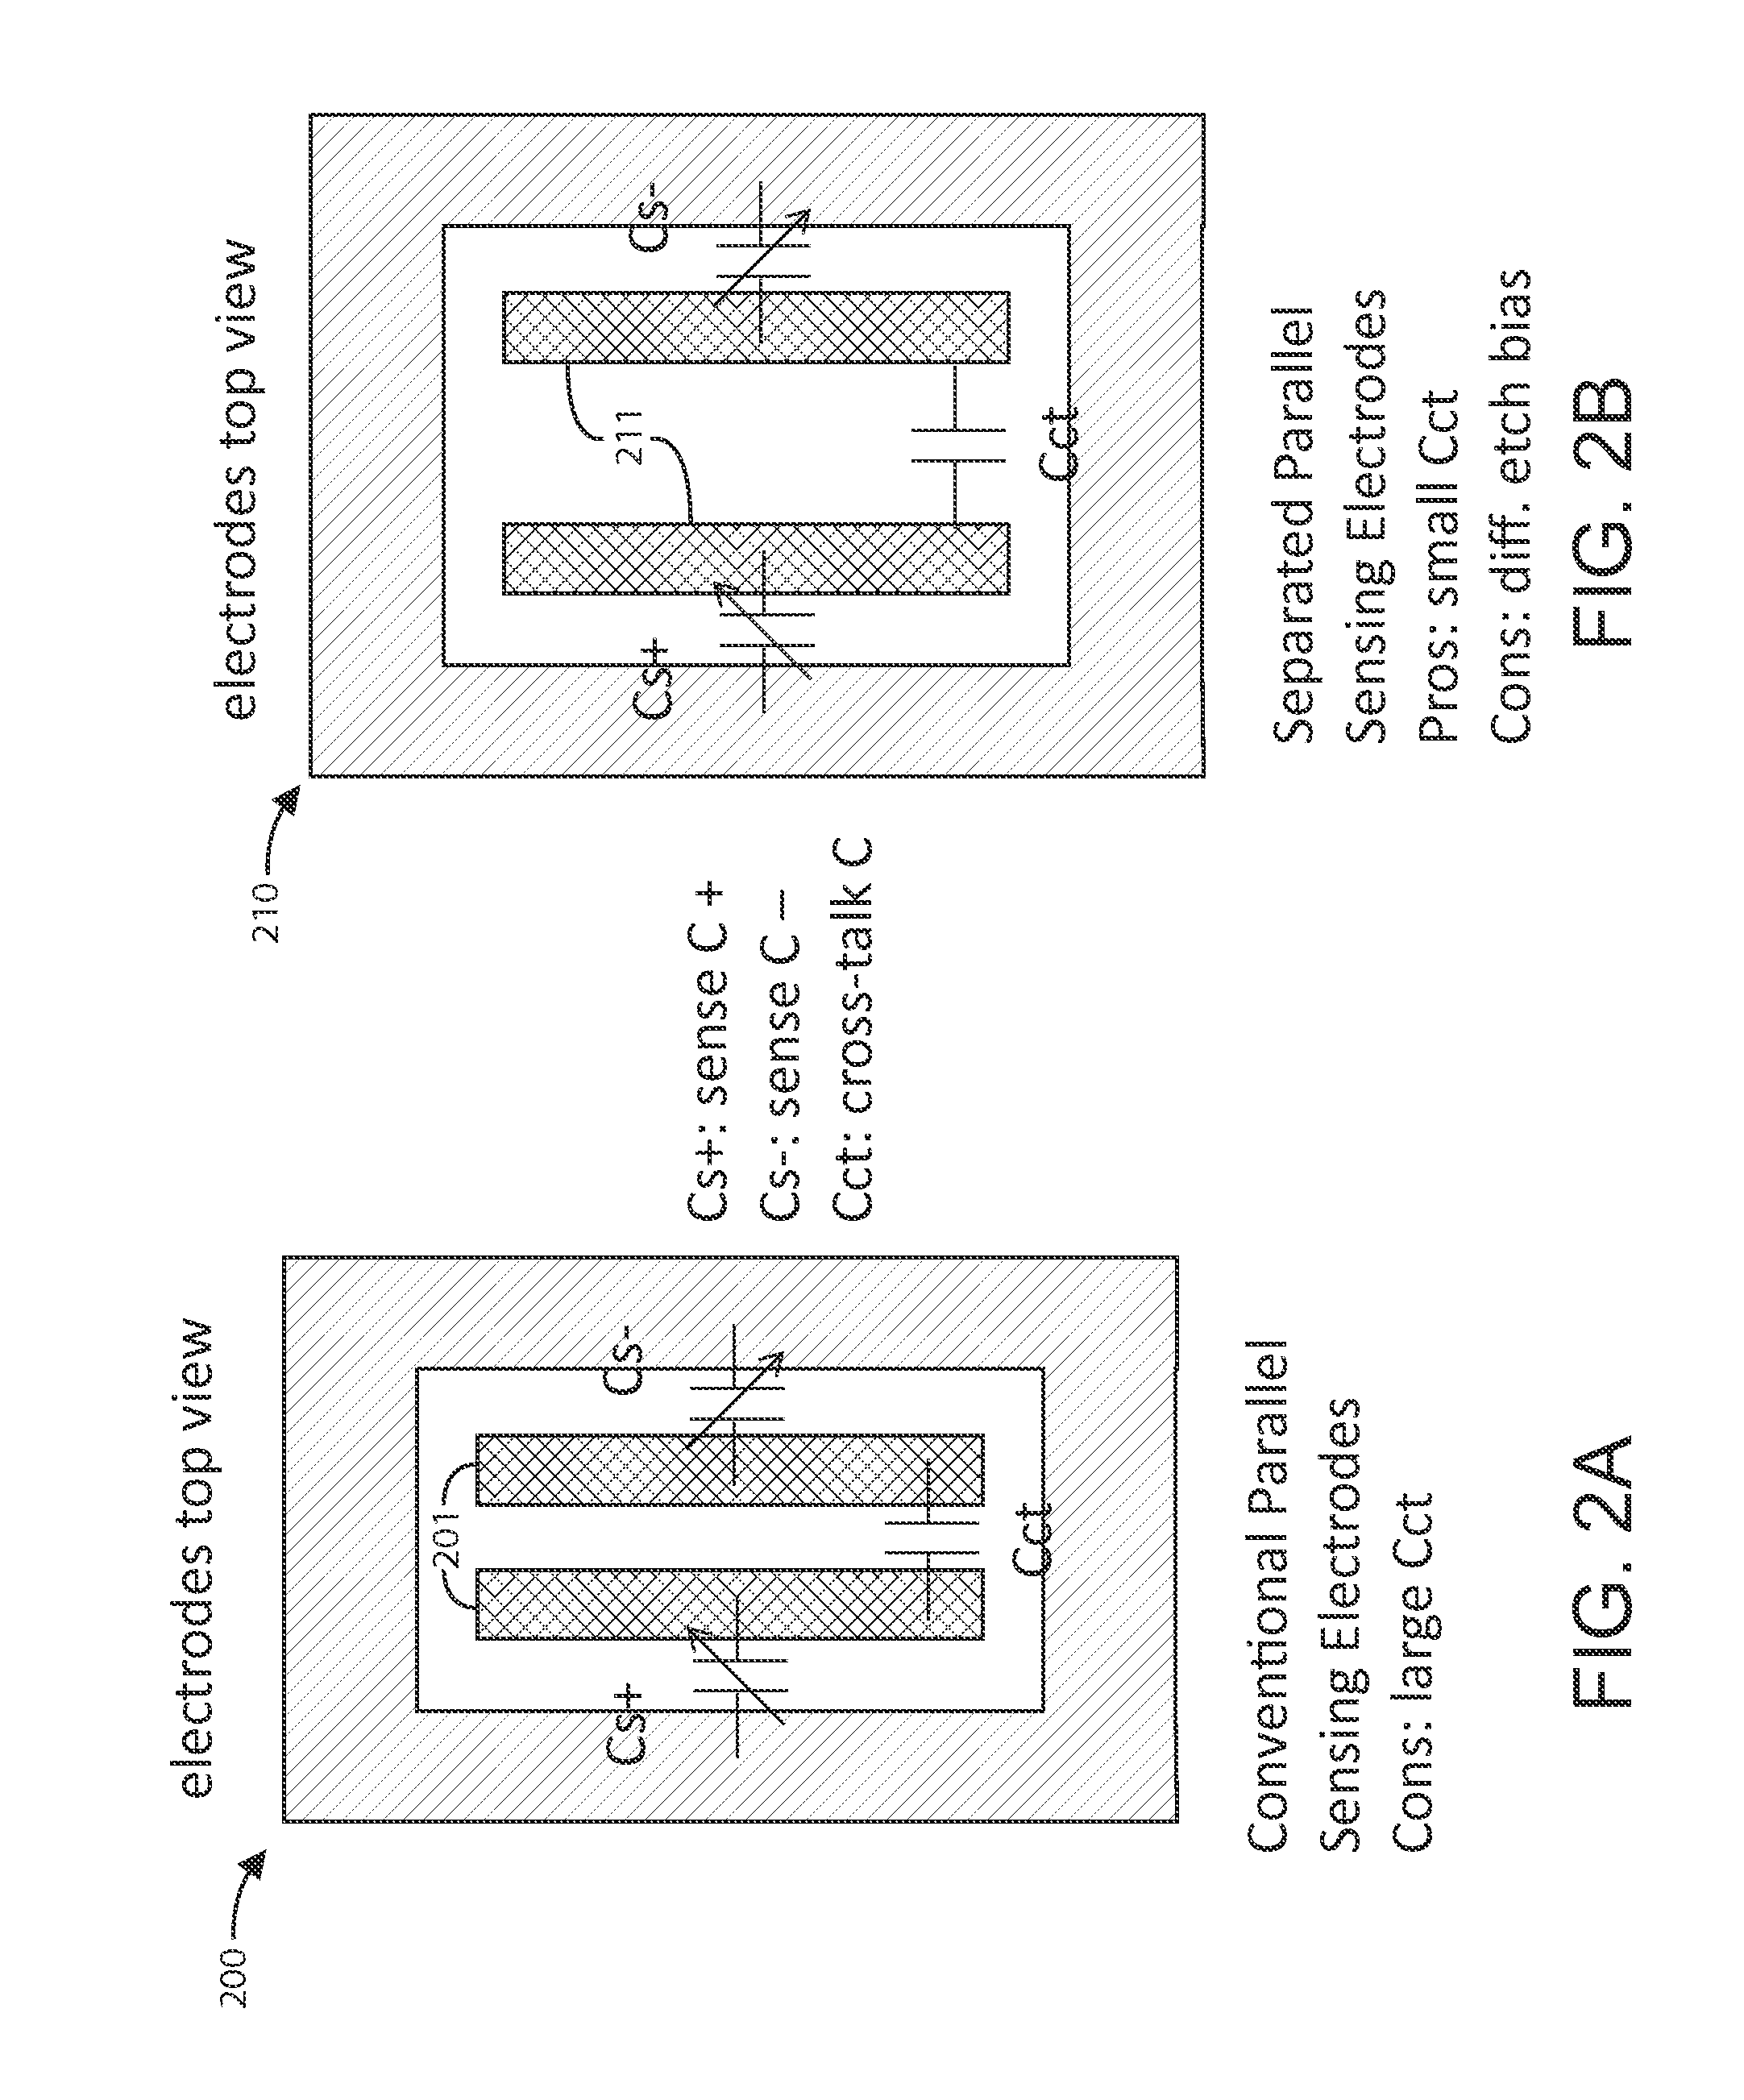 Methods and structures of integrated mems-cmos devices